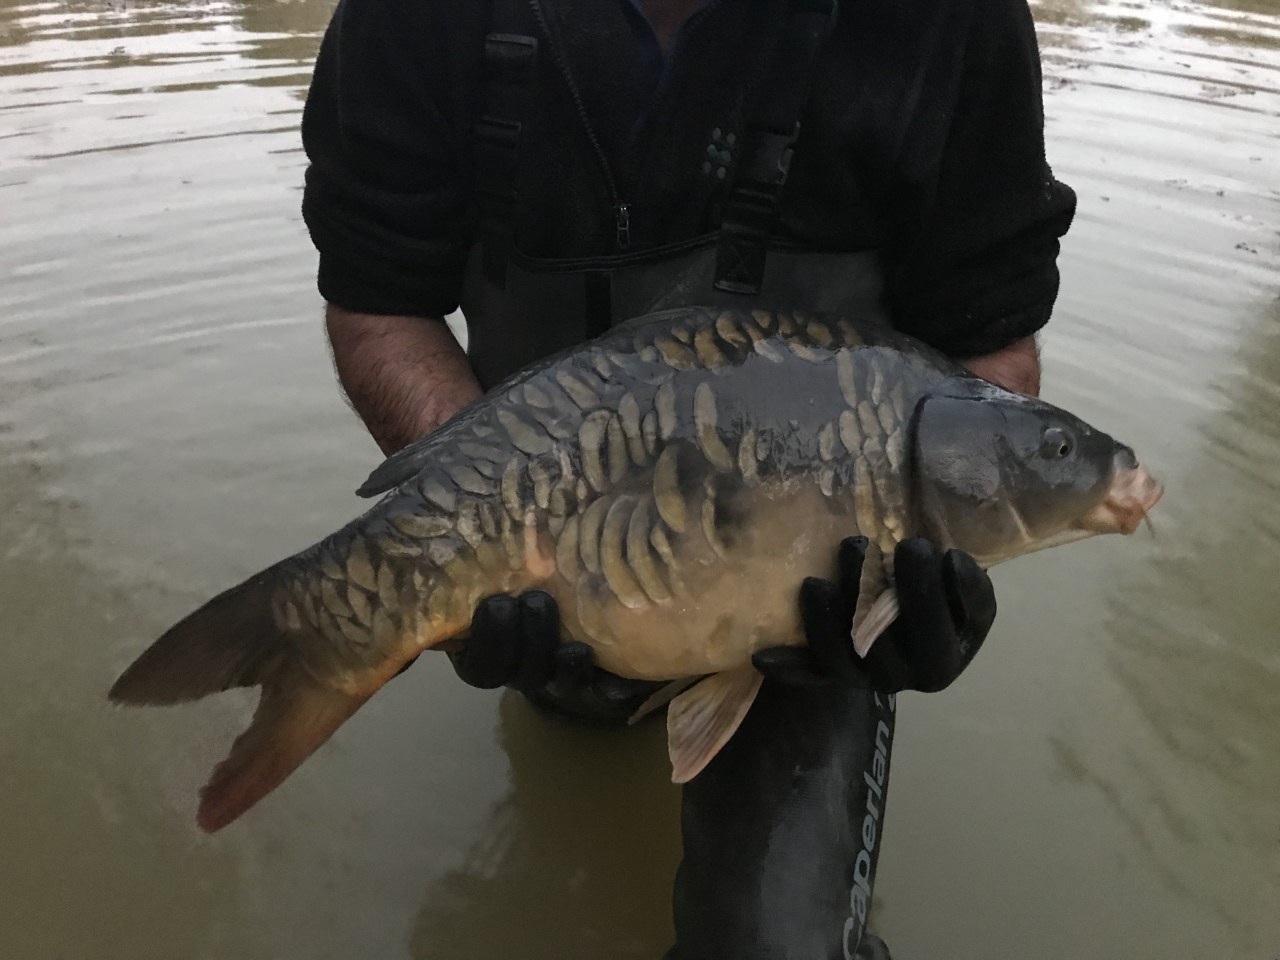 Scaly mirror stocked into North Lake